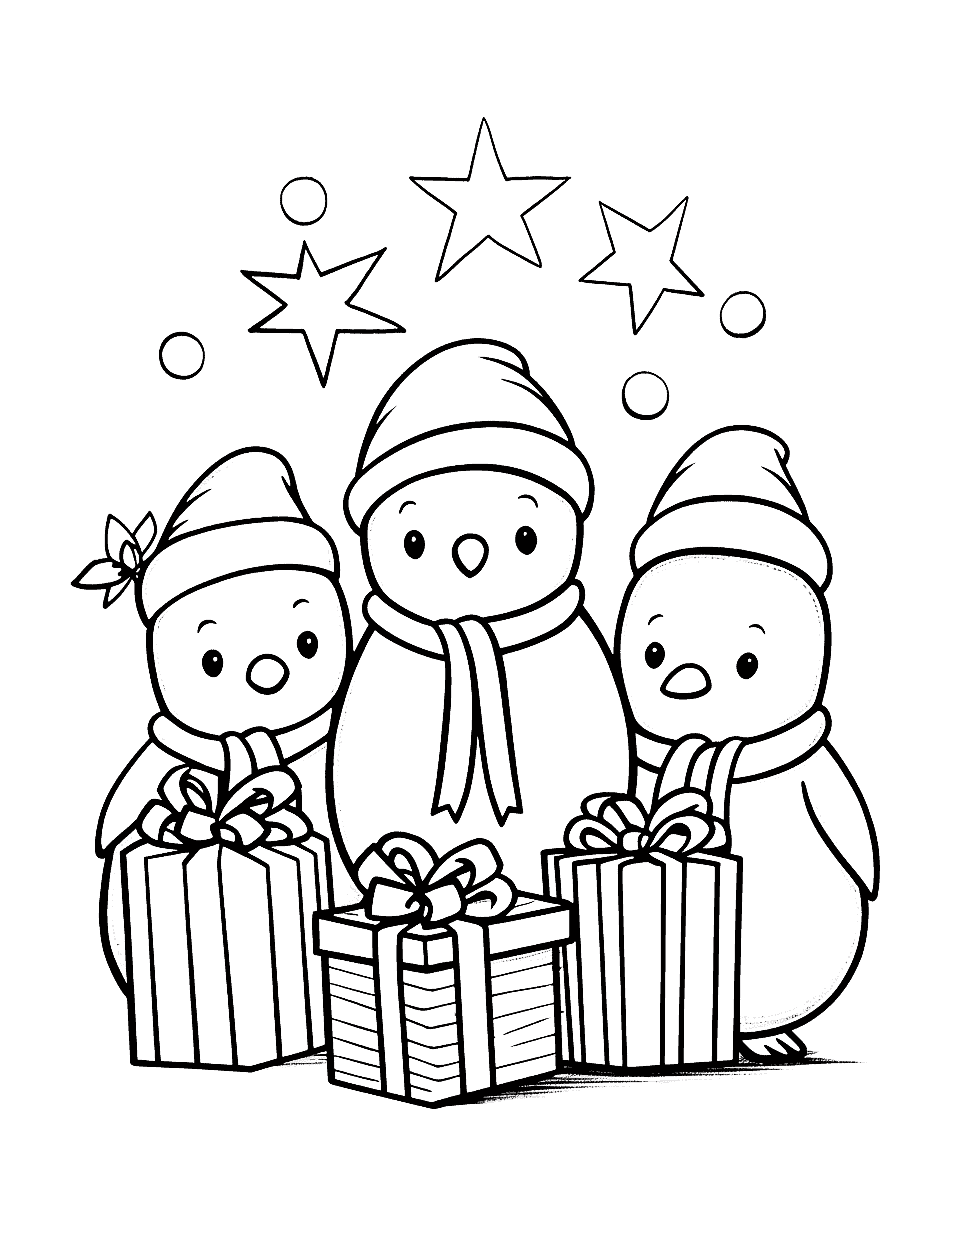 Penguin Christmas Party Coloring Page - A group of friendly penguins exchanging gifts at a Christmas party.